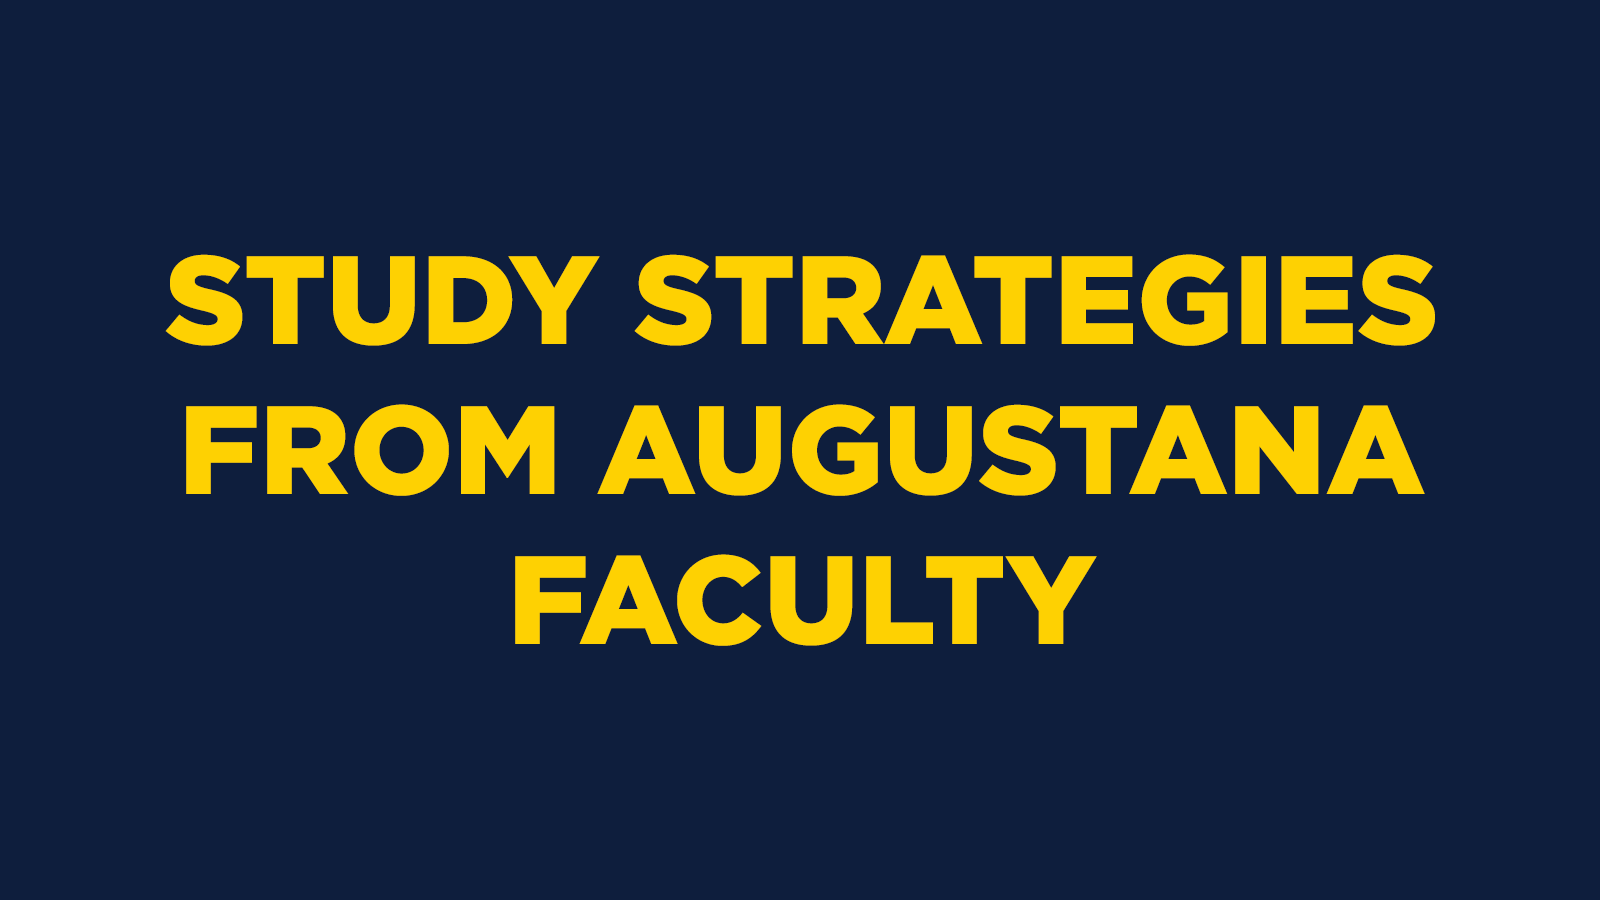 Study Strategies from Augustana Faculty